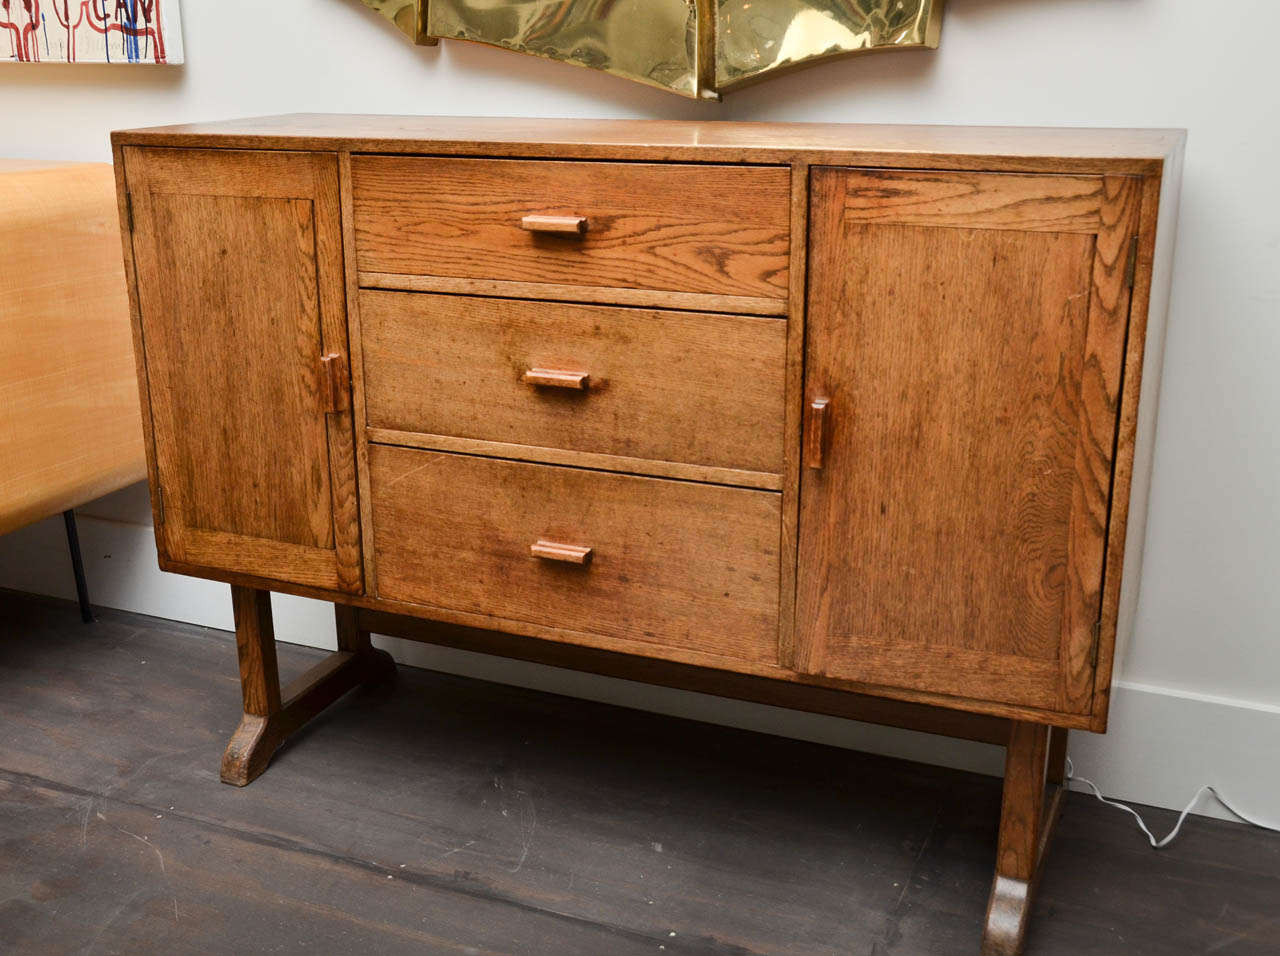 Beautiful high oak cabinet with three drawers and 2 cabinets.